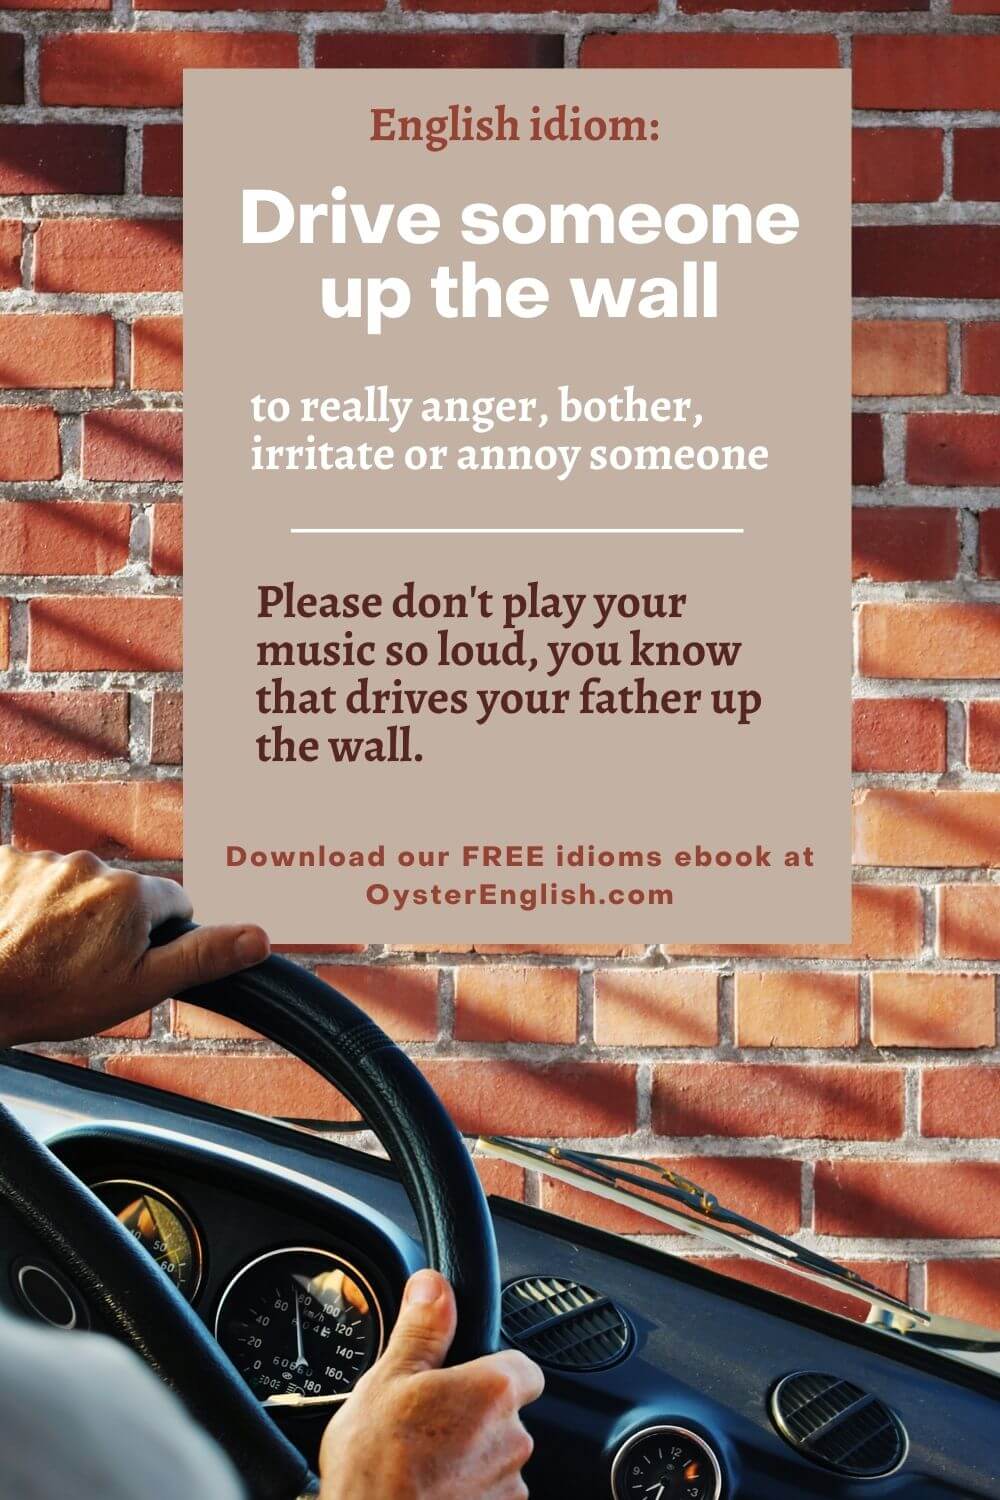 Image of a person's hands driving at the wheel of a car against a wall background. Caption: Please don't play your music so loud, you know it drives your father up the wall.